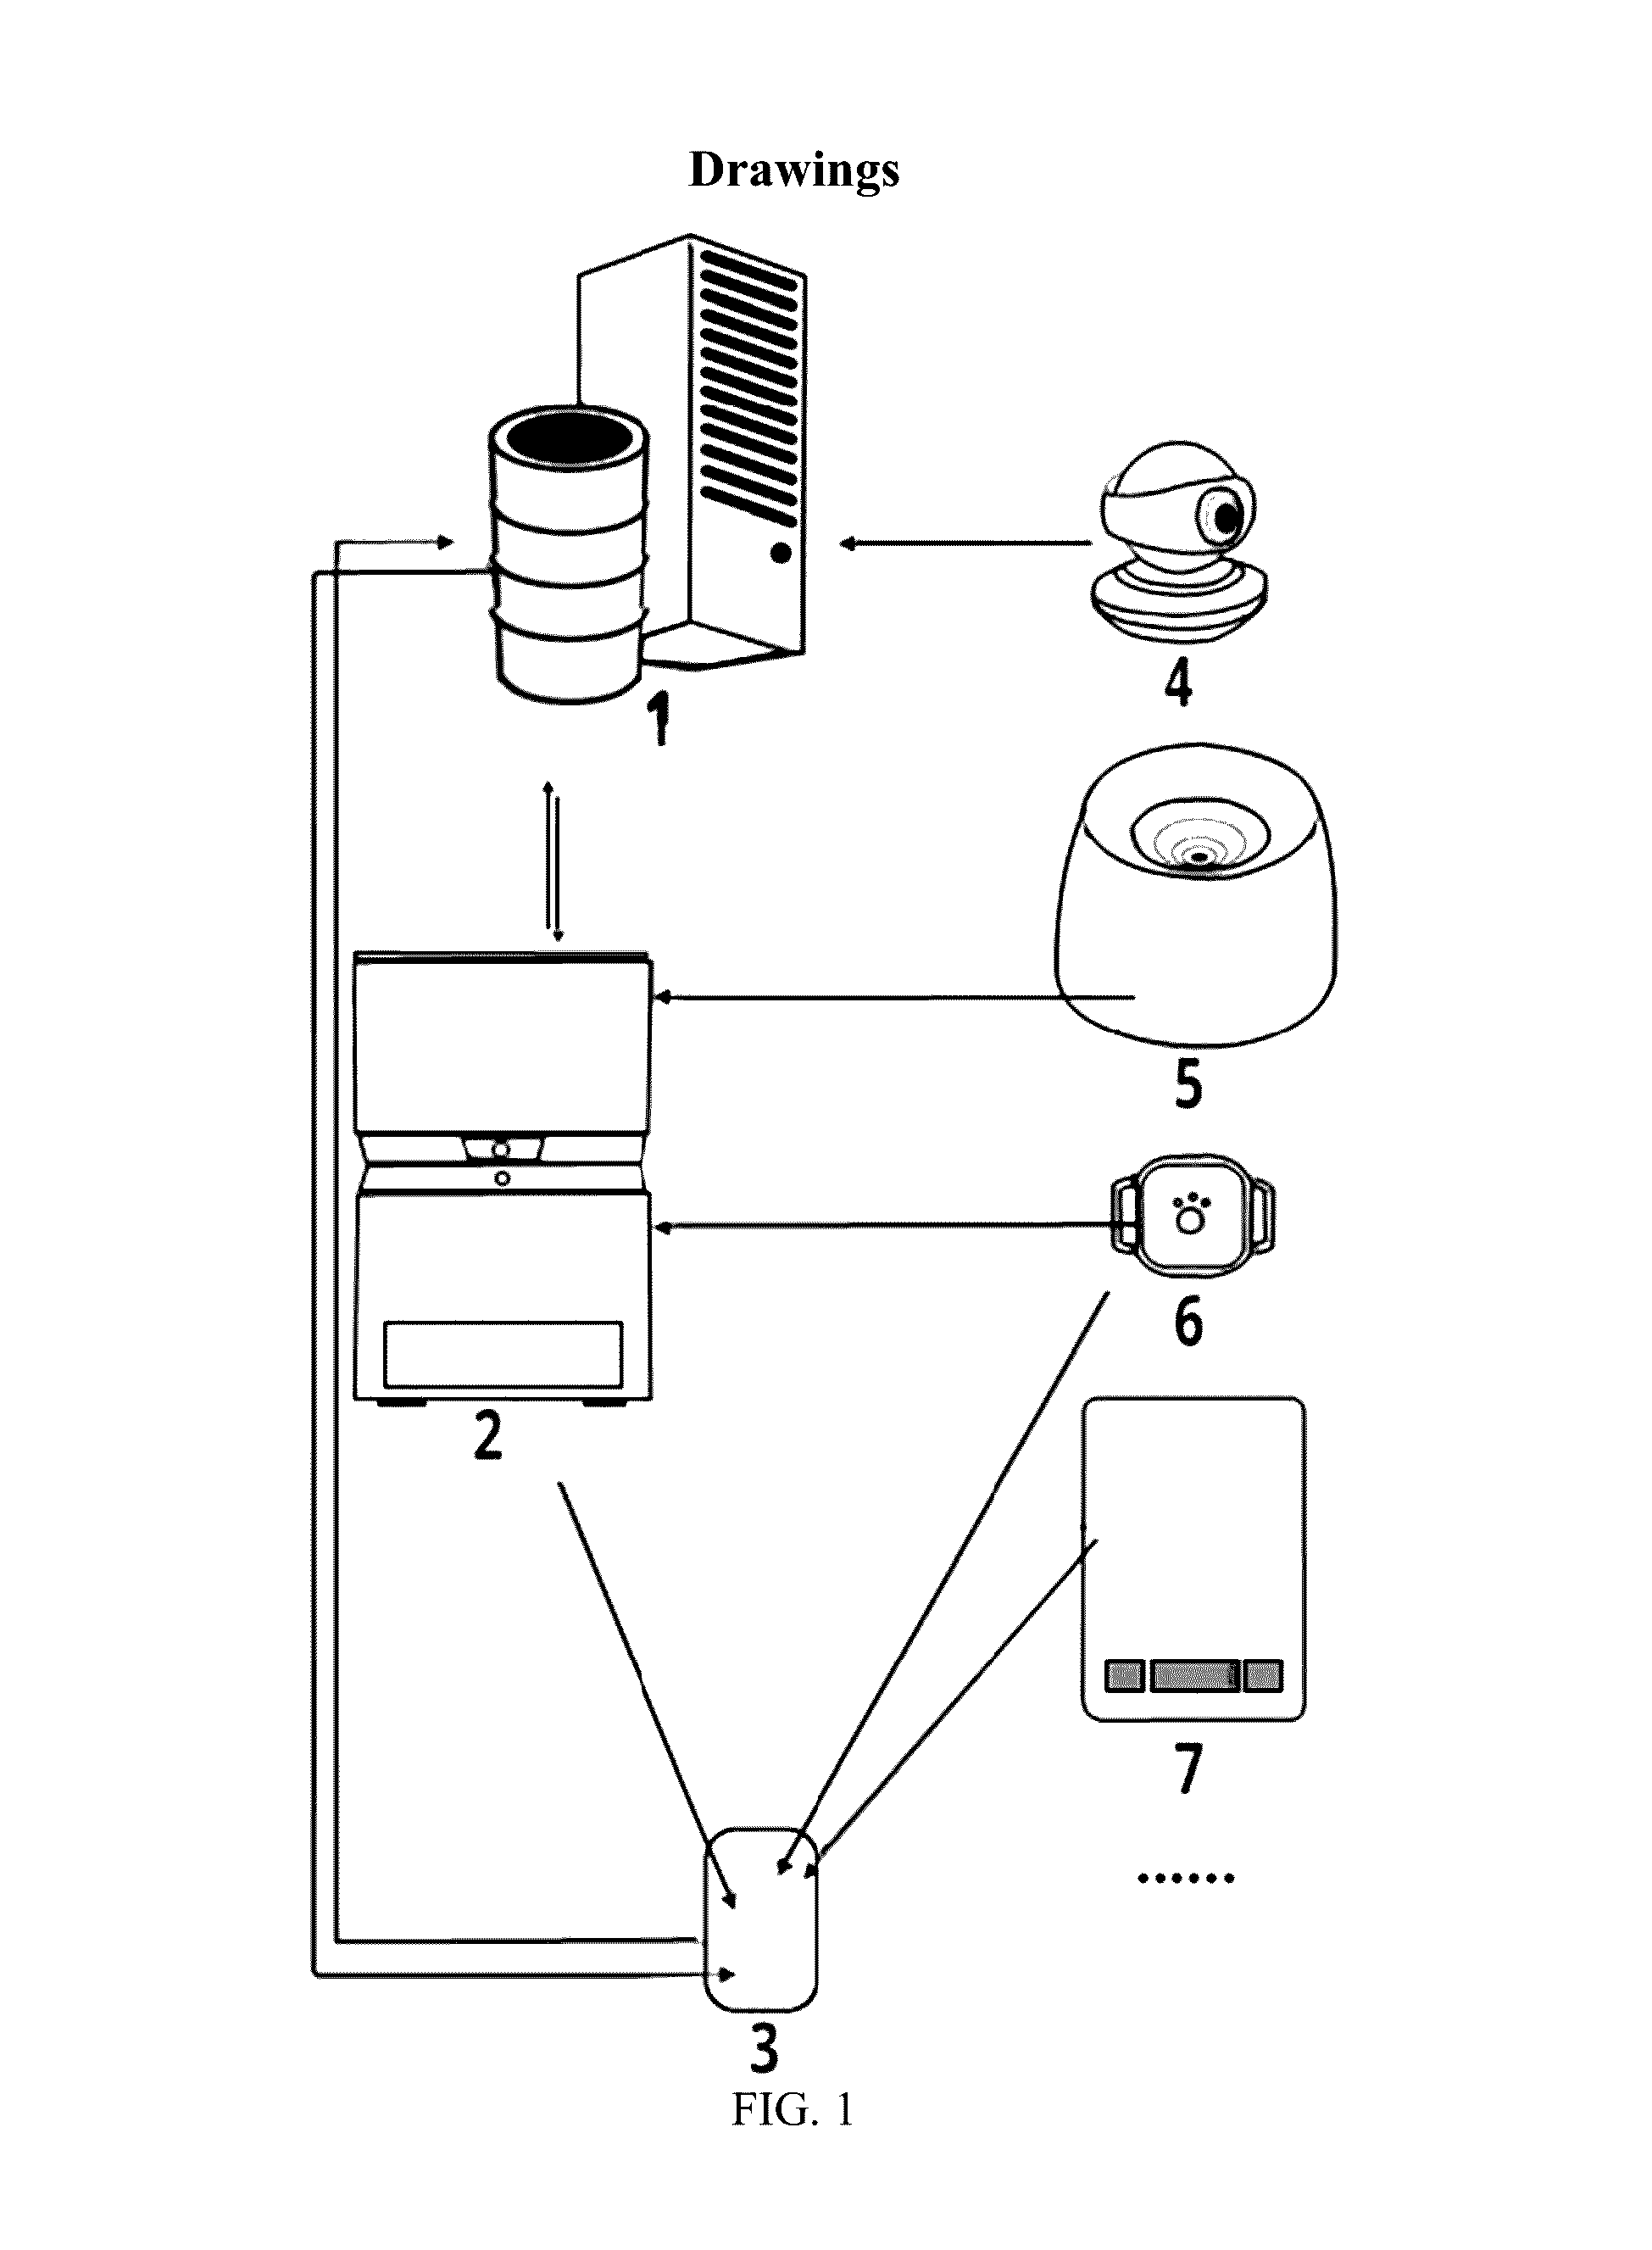 Pet health and life management system and method having self-learning capability